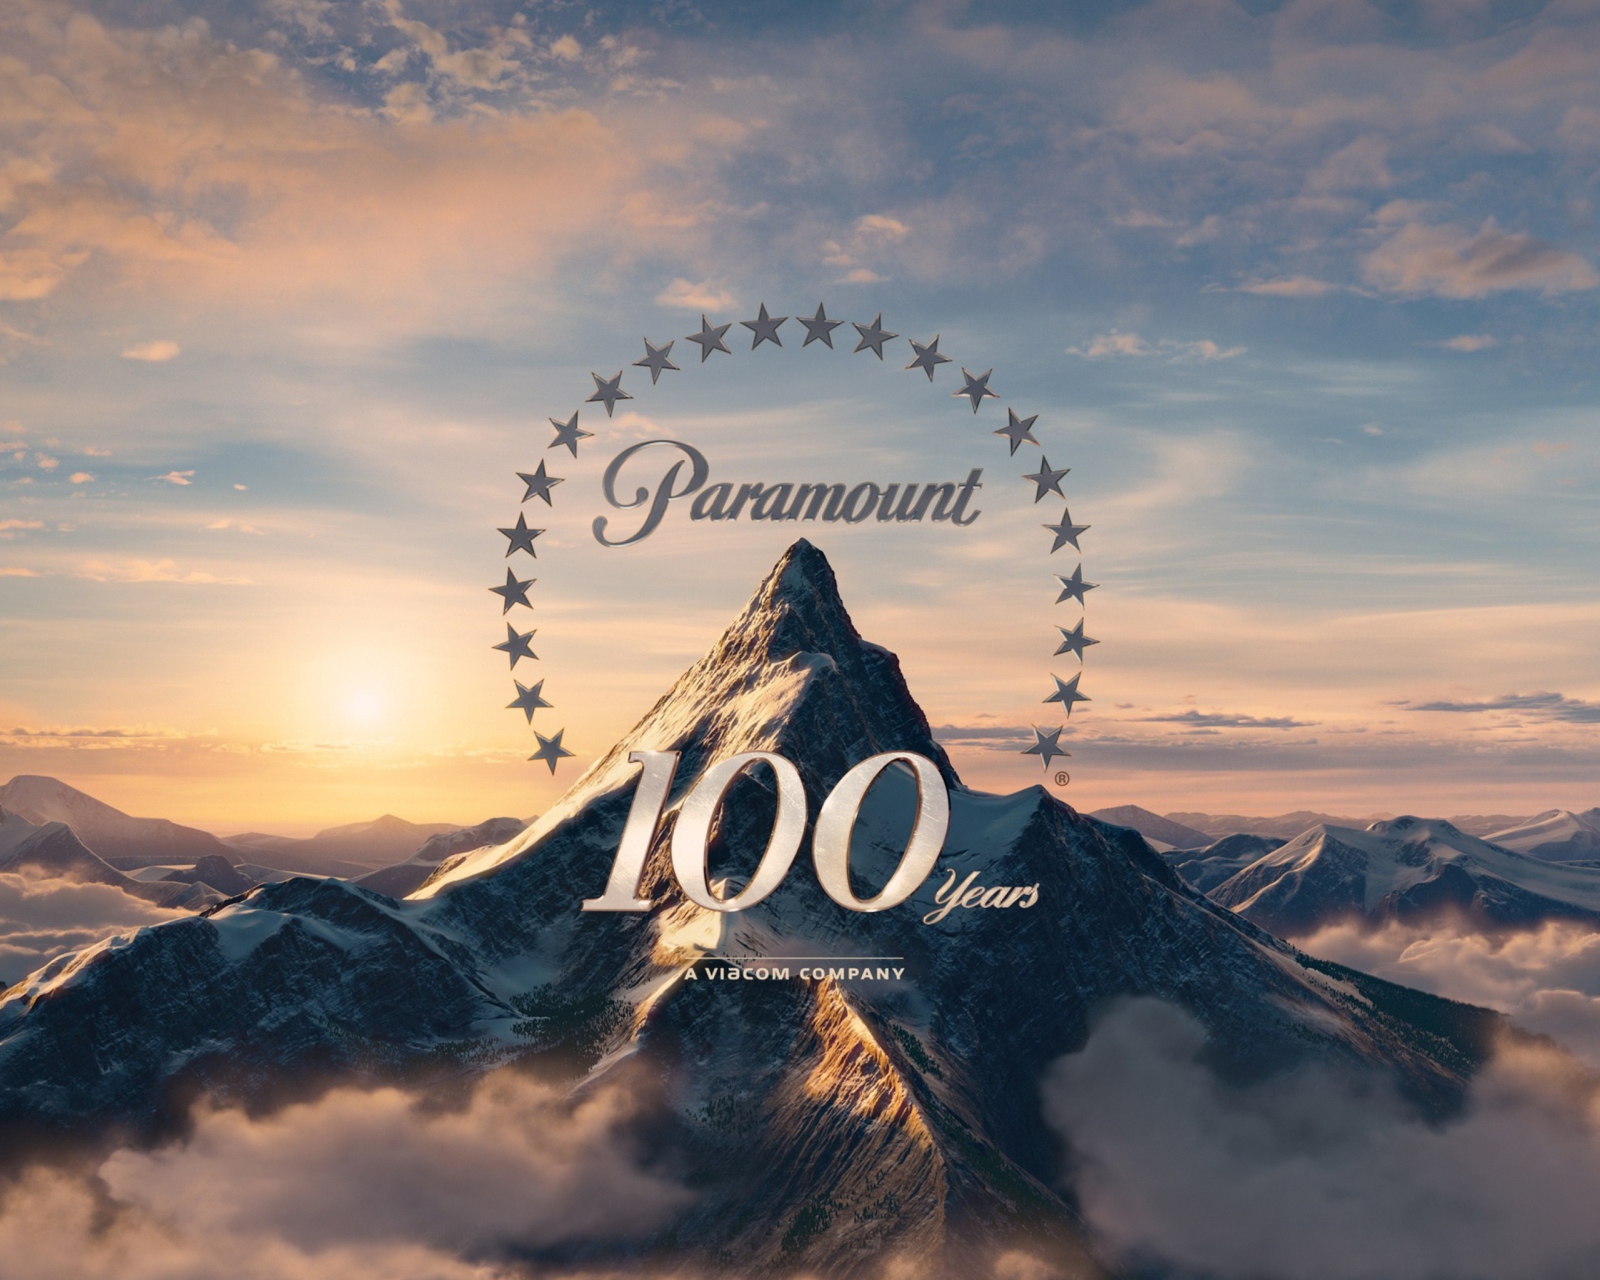 Paramount Pictures 100 Years screenshot #1 1600x1280